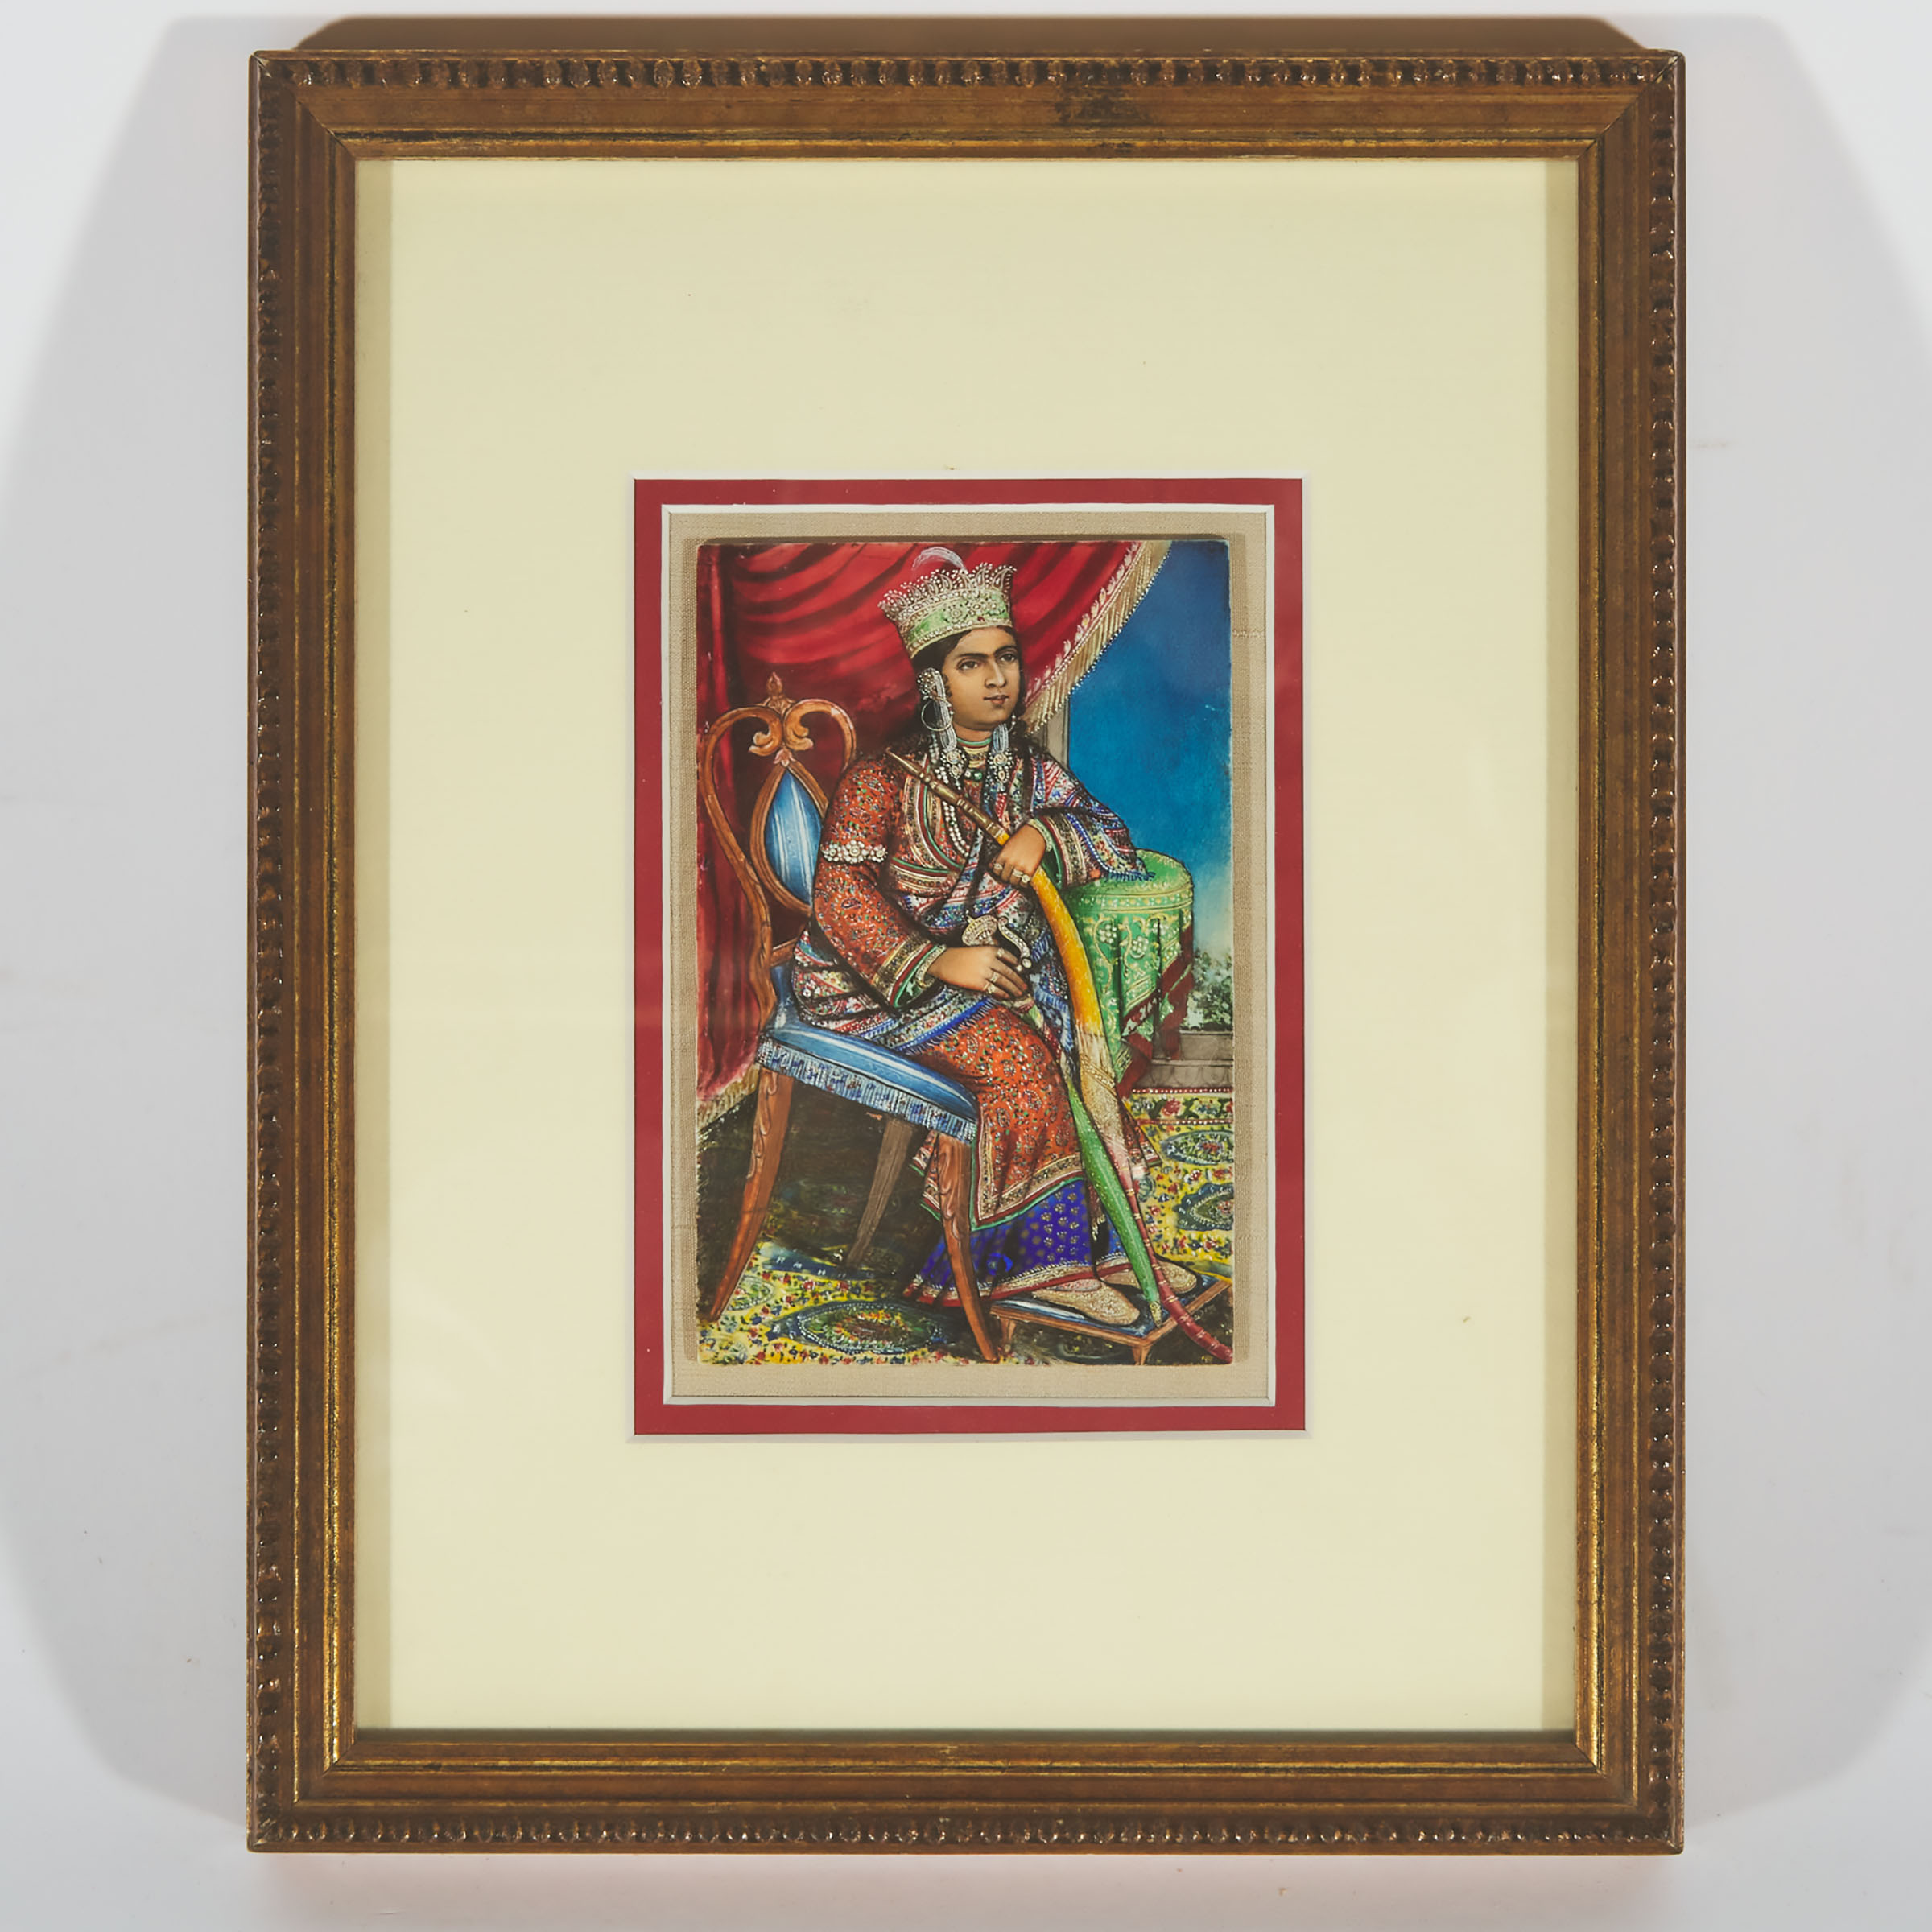 A Framed Ivory Portrait of an Indian